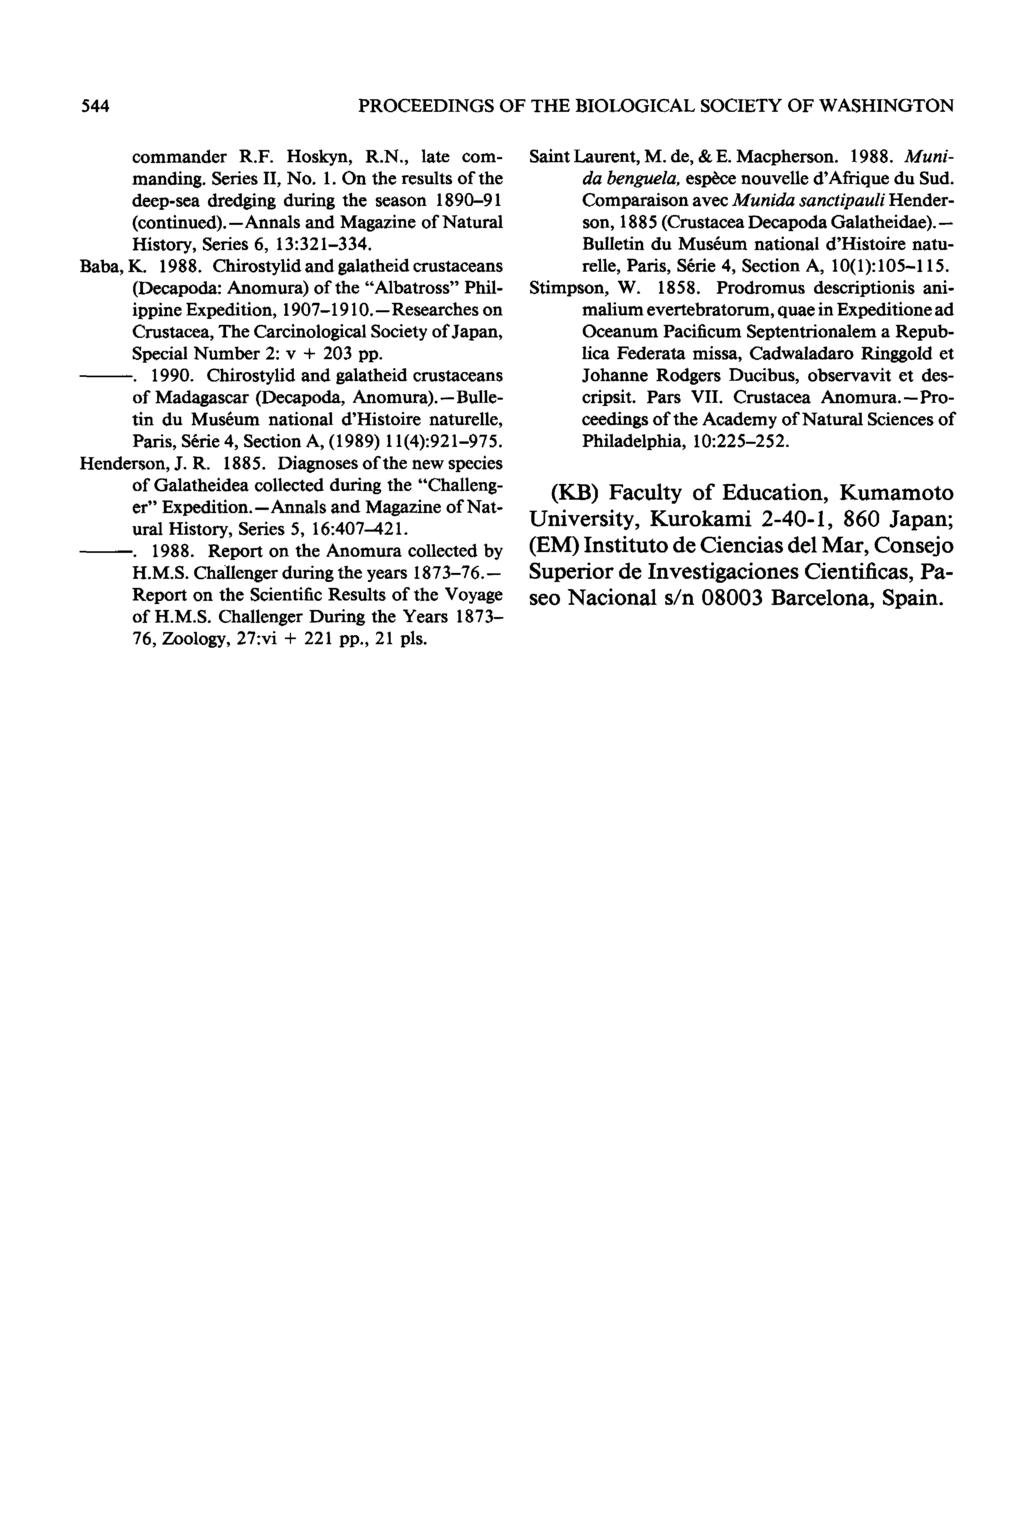 544 PROCEEDINGS OF THE BIOLOGICAL SOCIETY OF WASHINGTON commander R.F. Hoskyn, R.N., late commanding. Series II, No. 1. On the results of the deep-sea dredging during the season 1890-91 (continued).